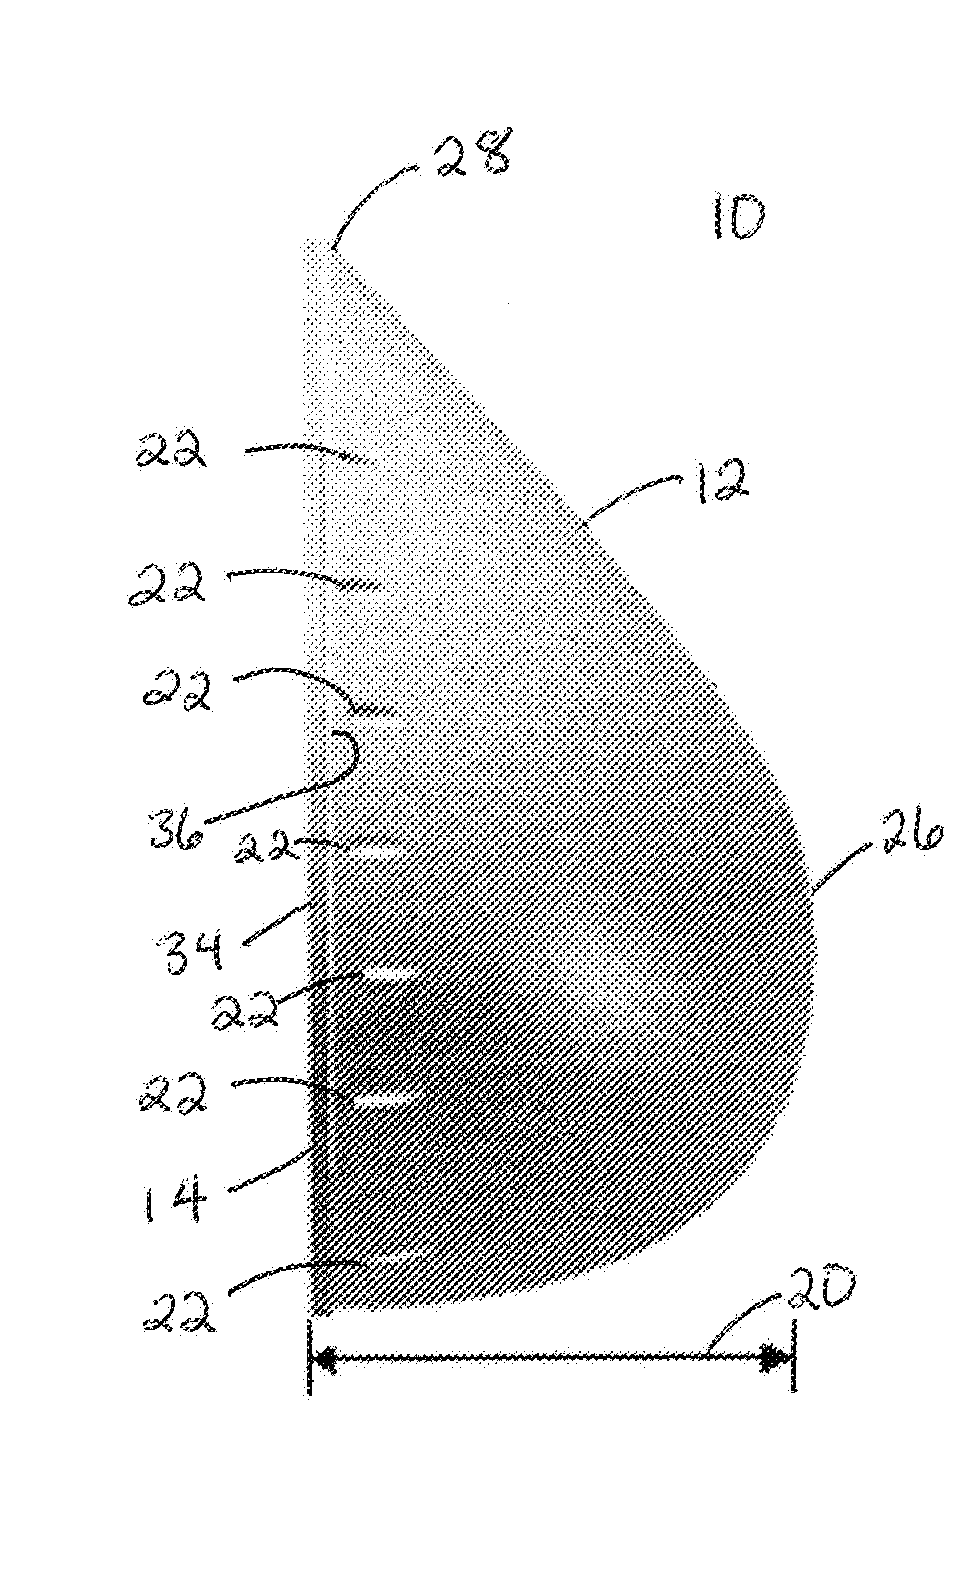 Breast Reconstruction Device and Methods